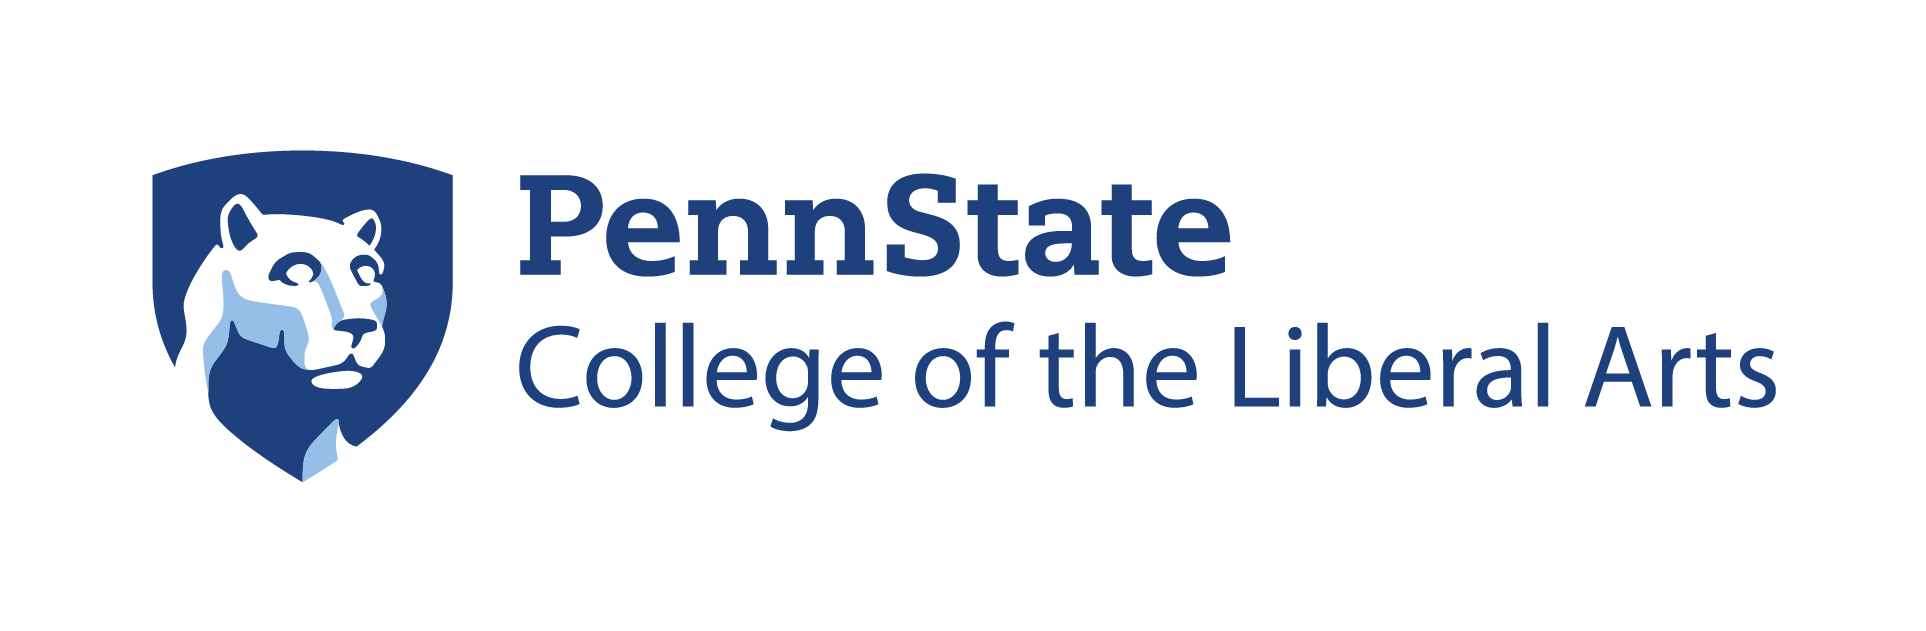 Penn State College of the Liberal Arts